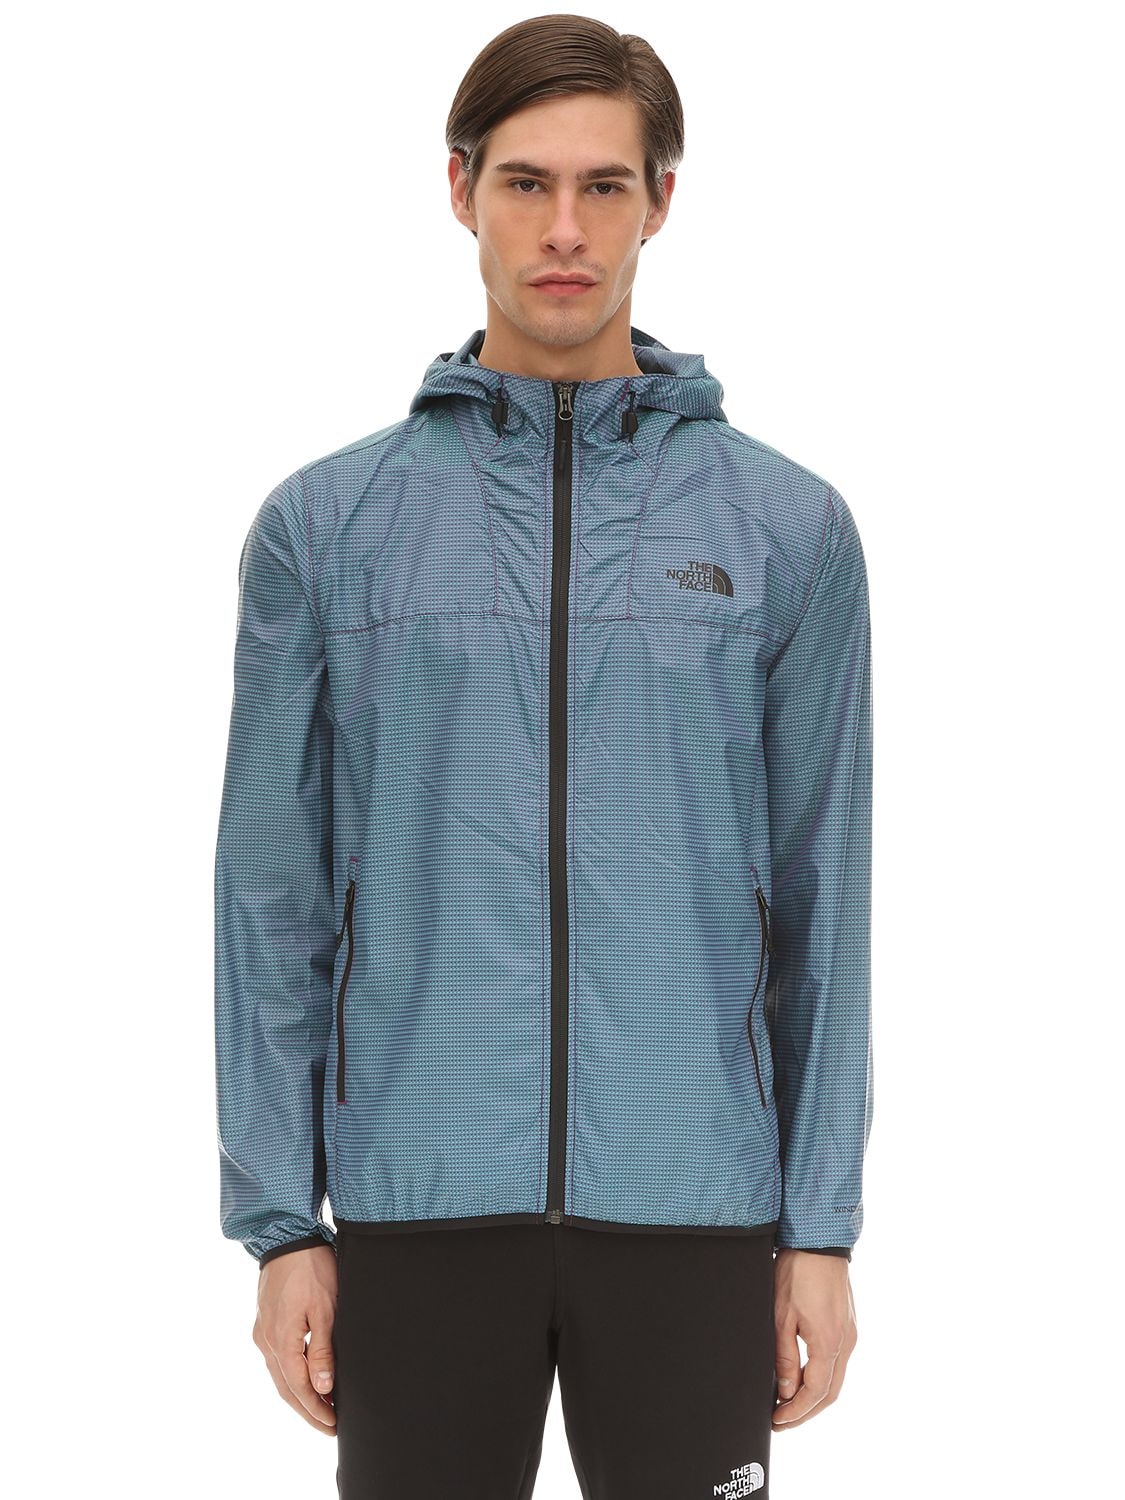 north face iridescent cyclone